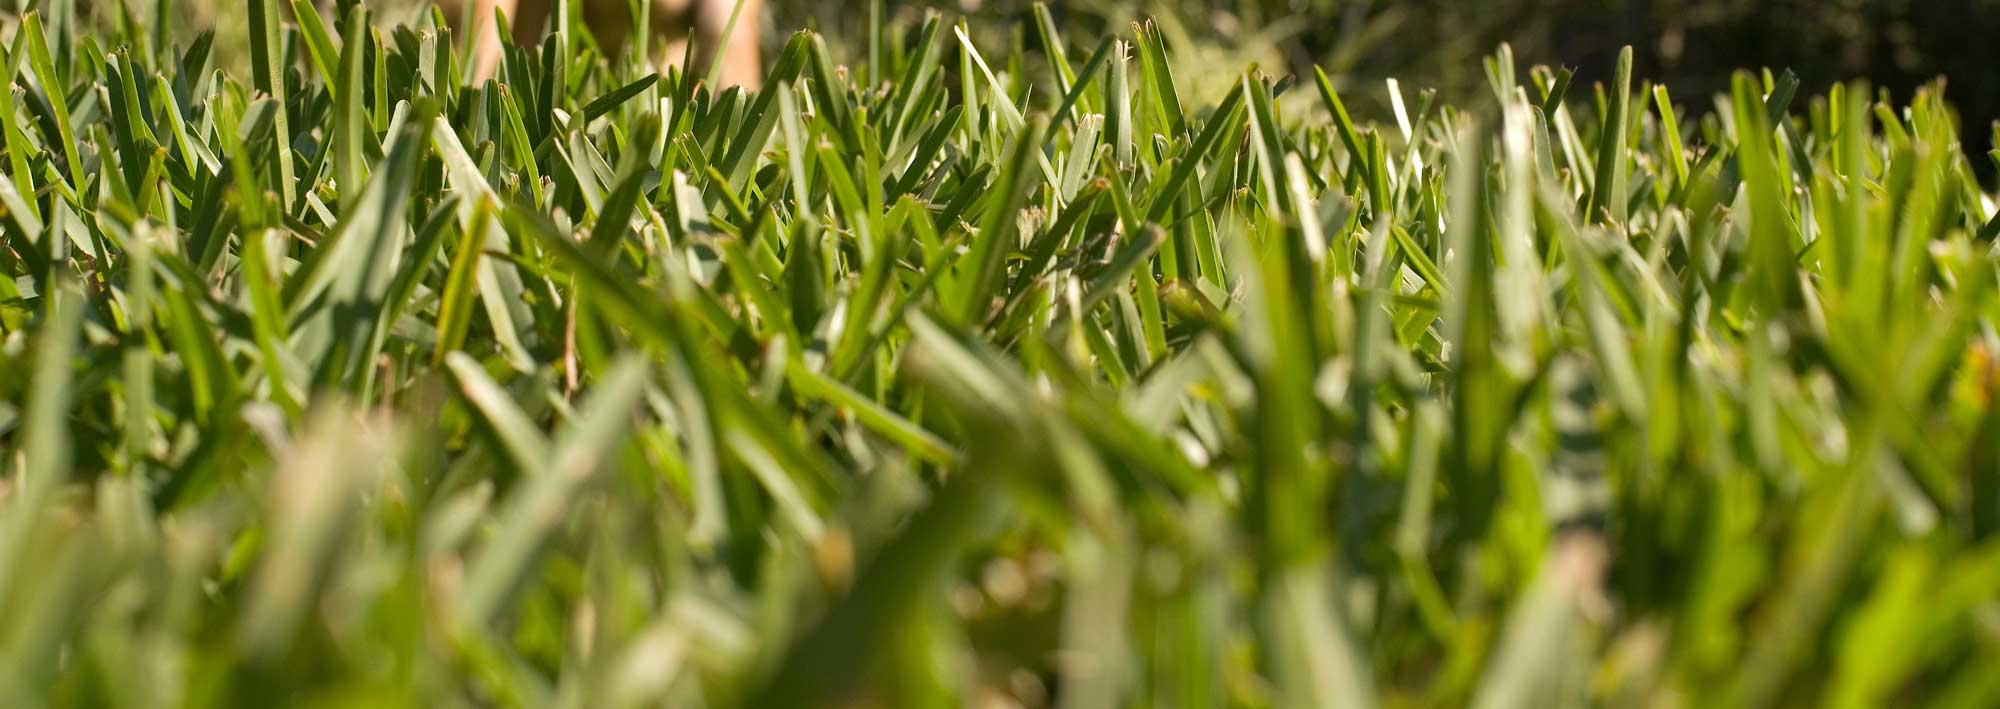 Picture of st. augustine grass